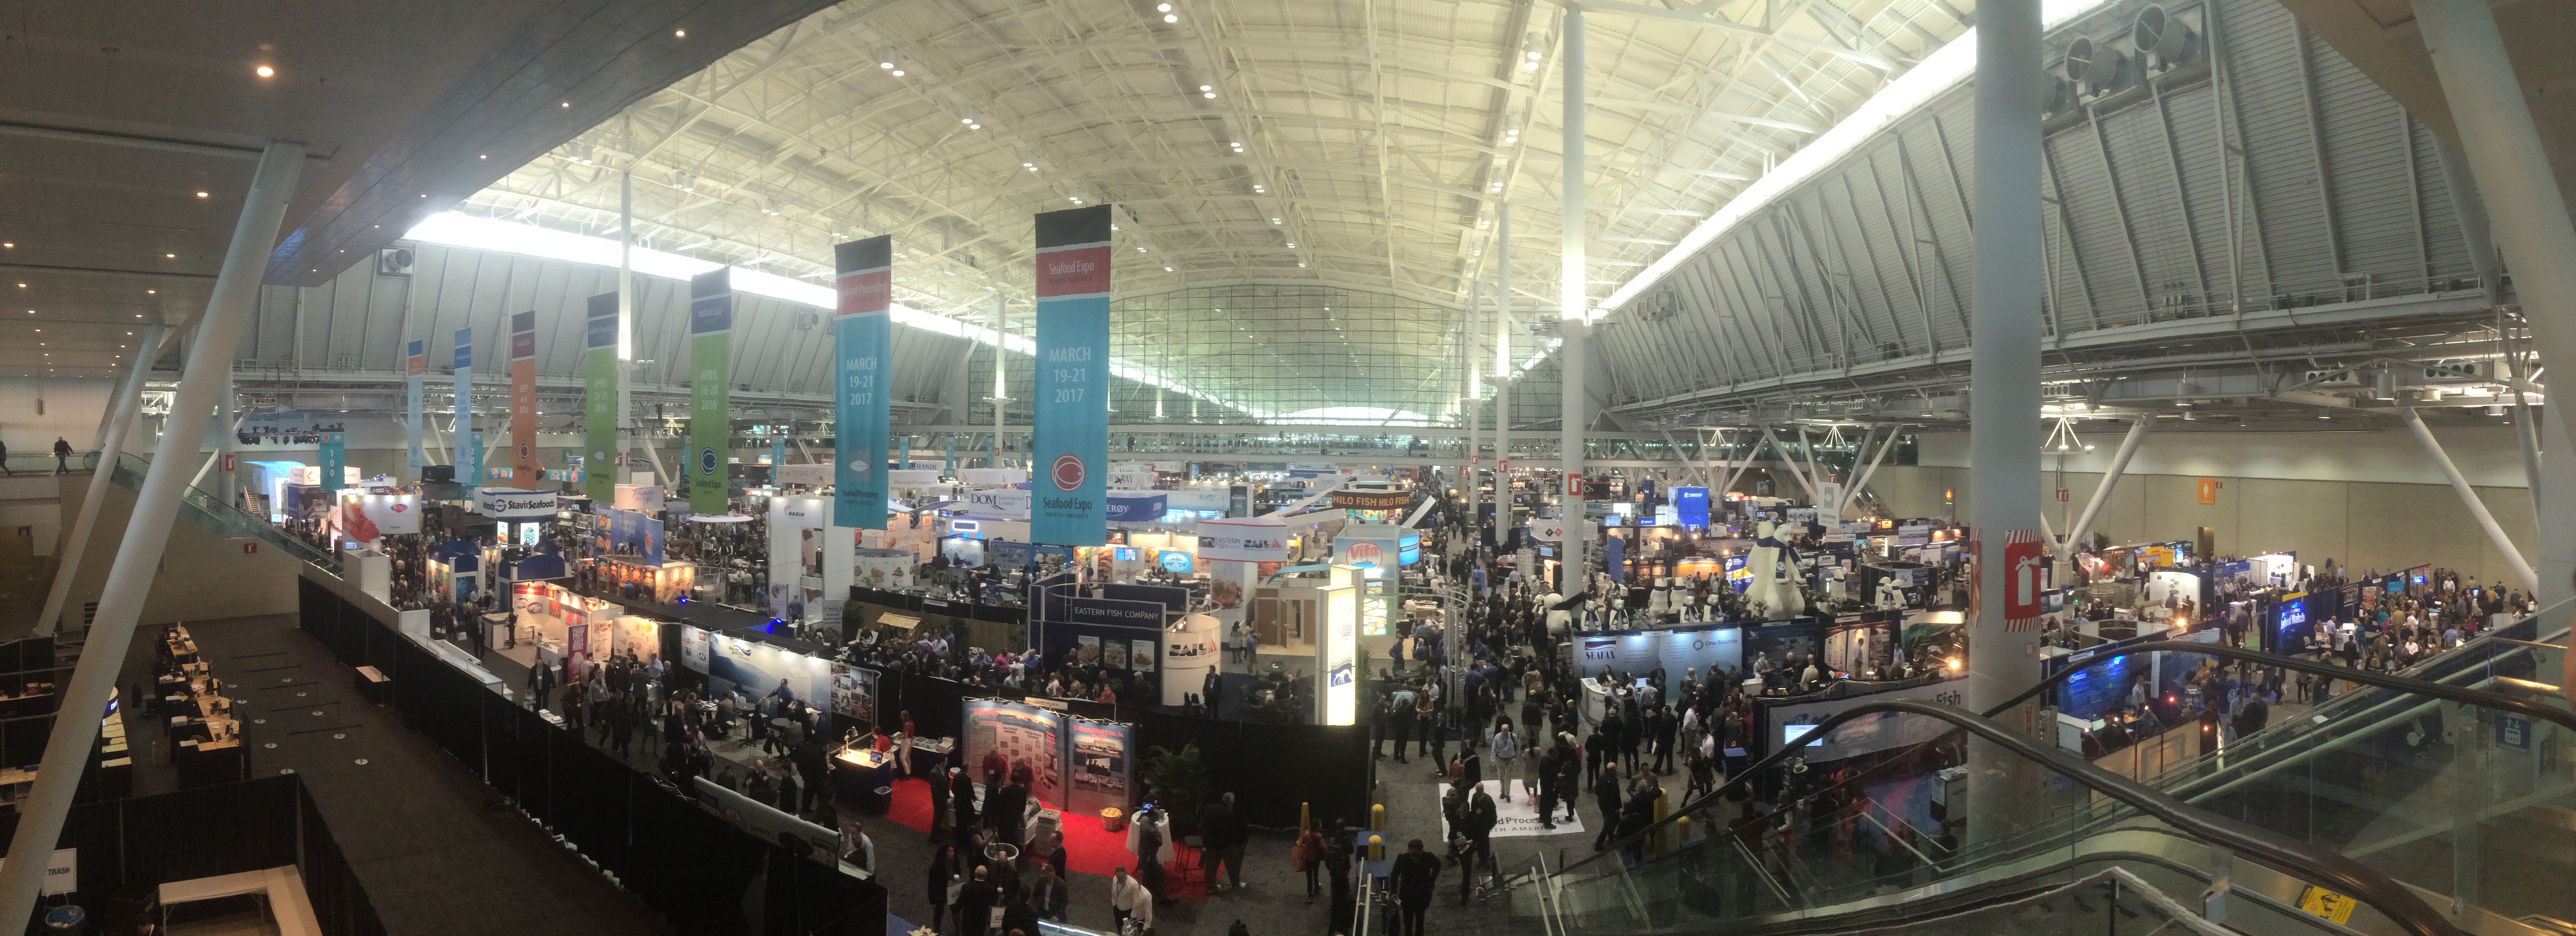 Samuels at the Seafood Expo North America